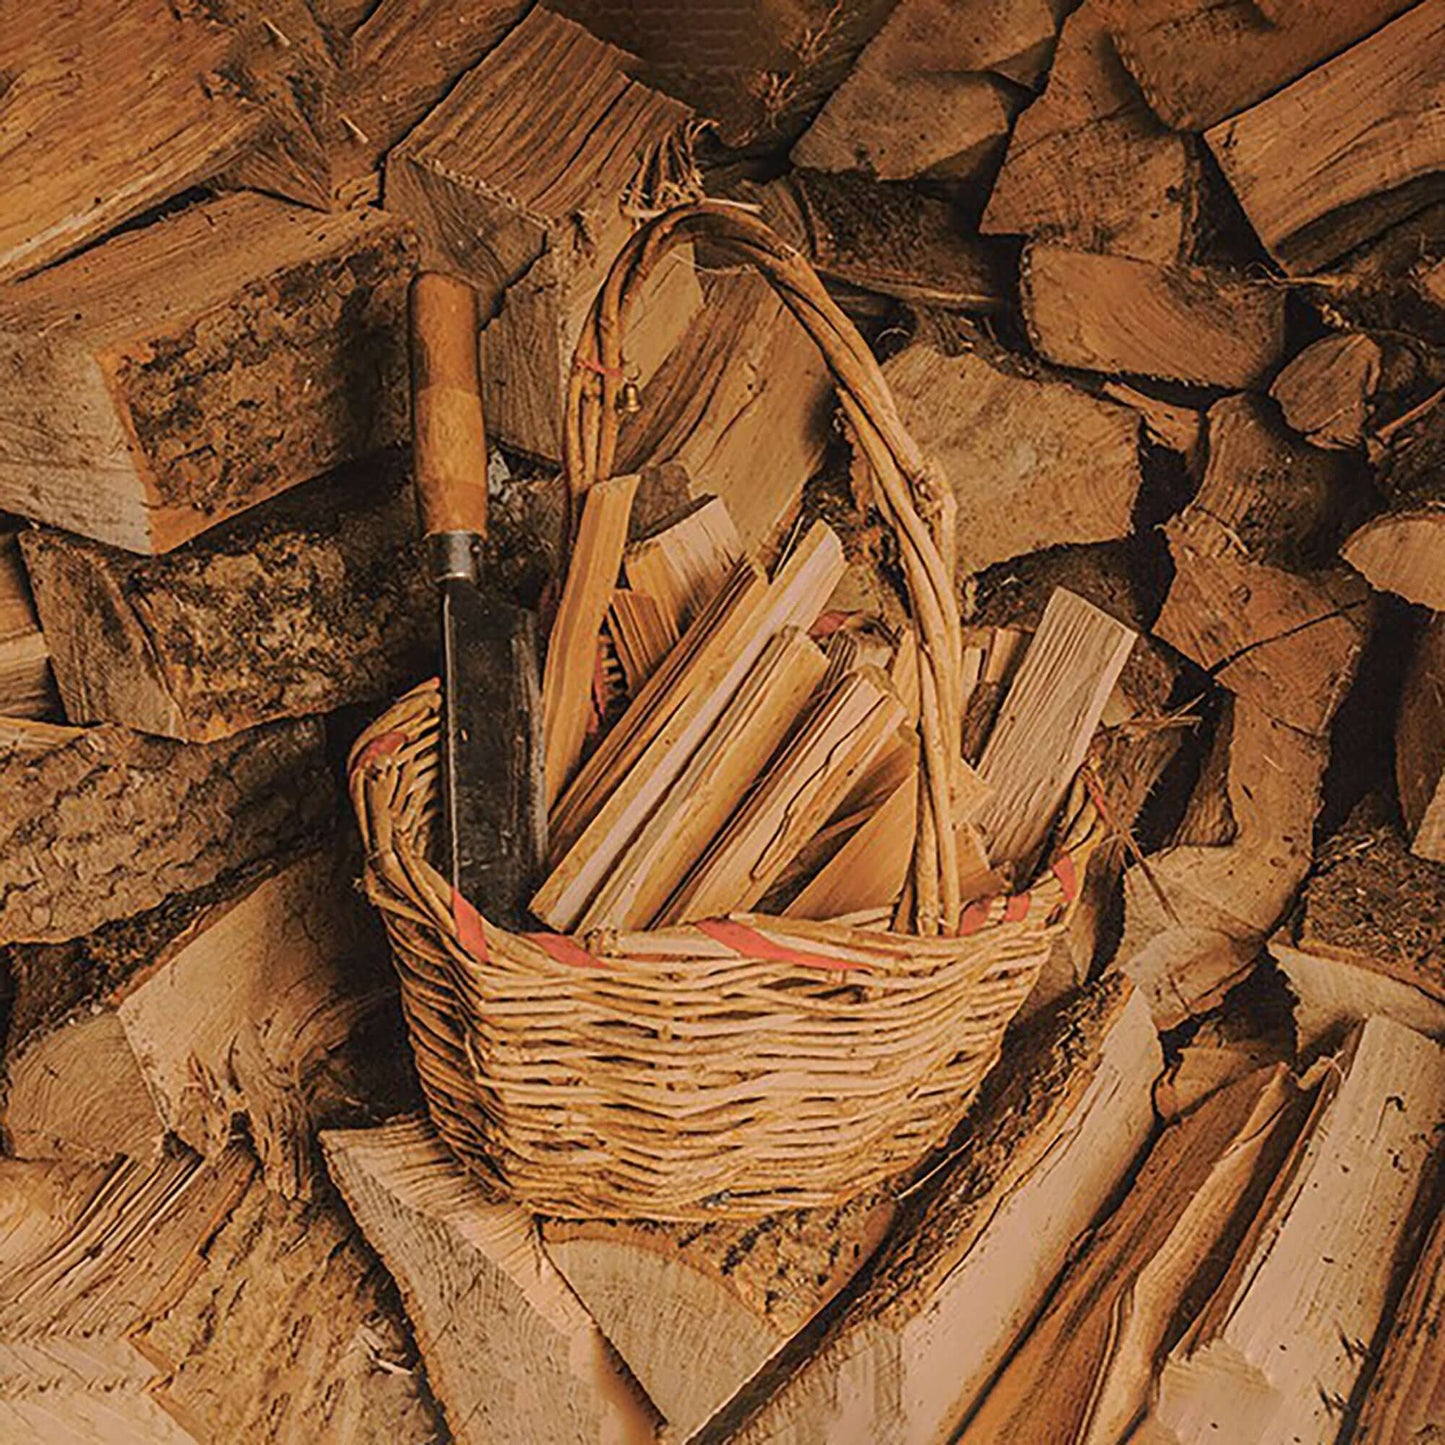 6x (2.5kg) Bags of Kindling, 15kg, for Stoves & Fireplaces, Firelighter Twigs